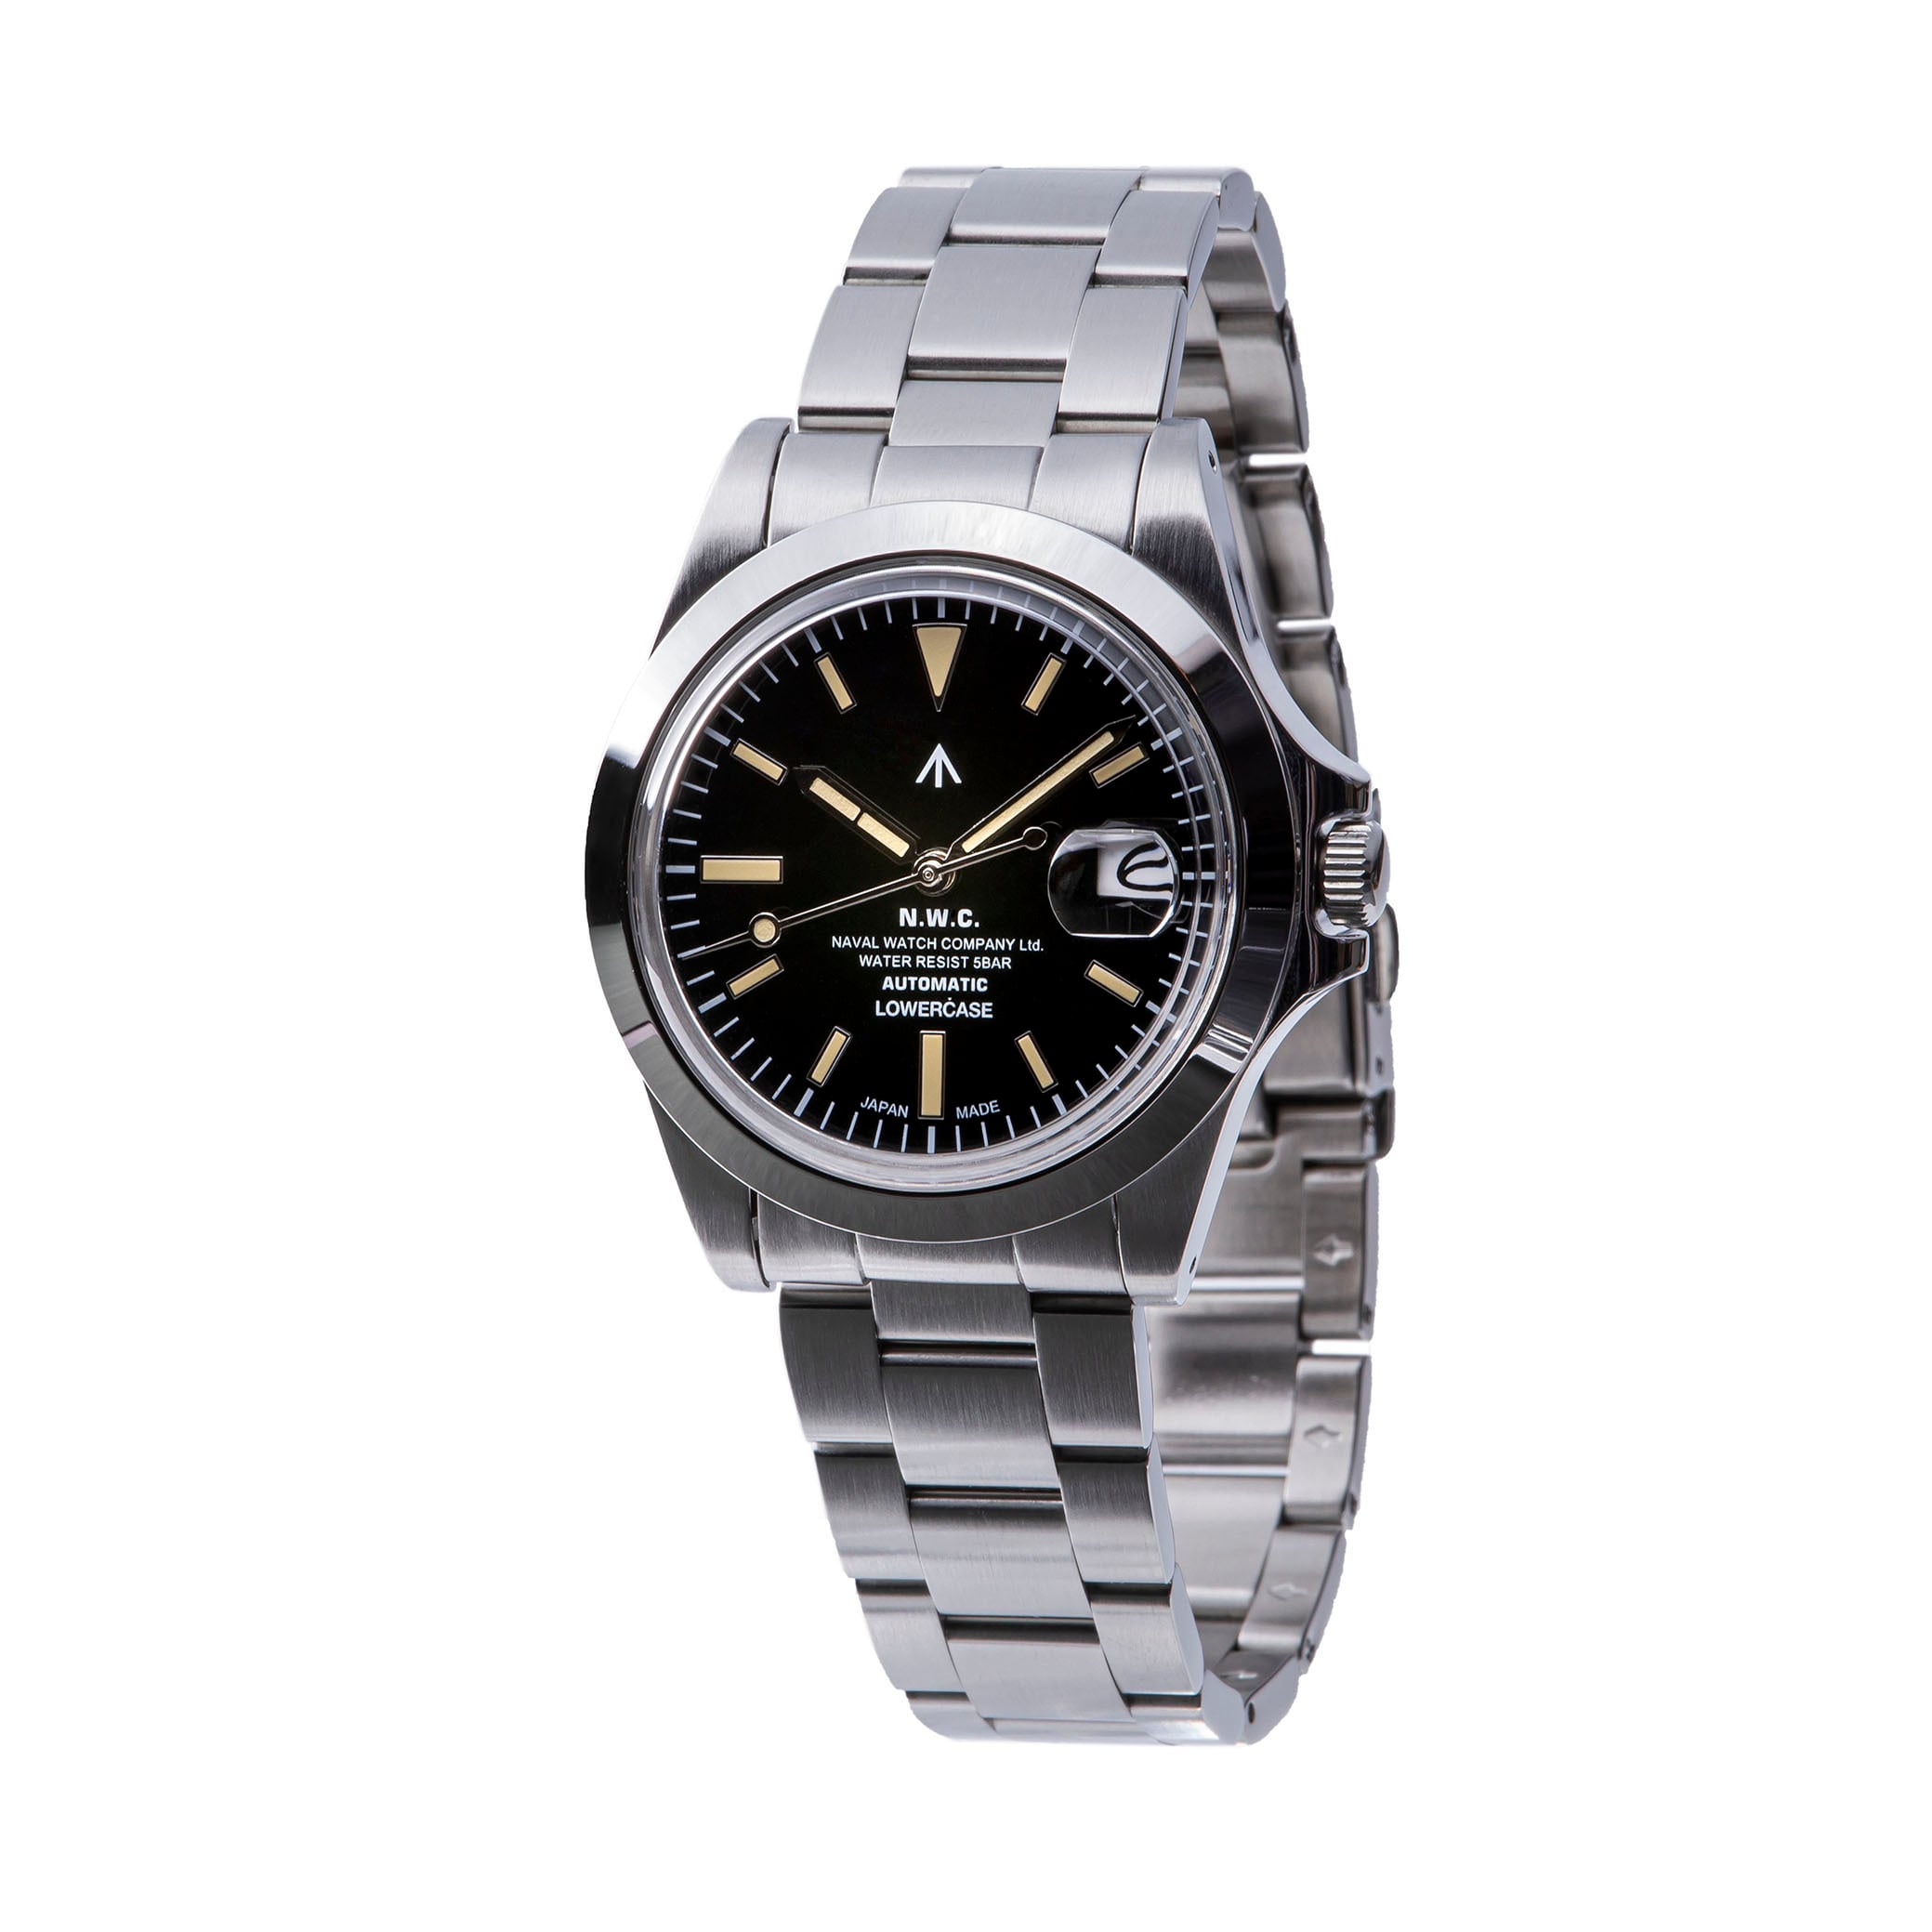 NAVAL WATCH Produced byLOWERCASE FRXA001